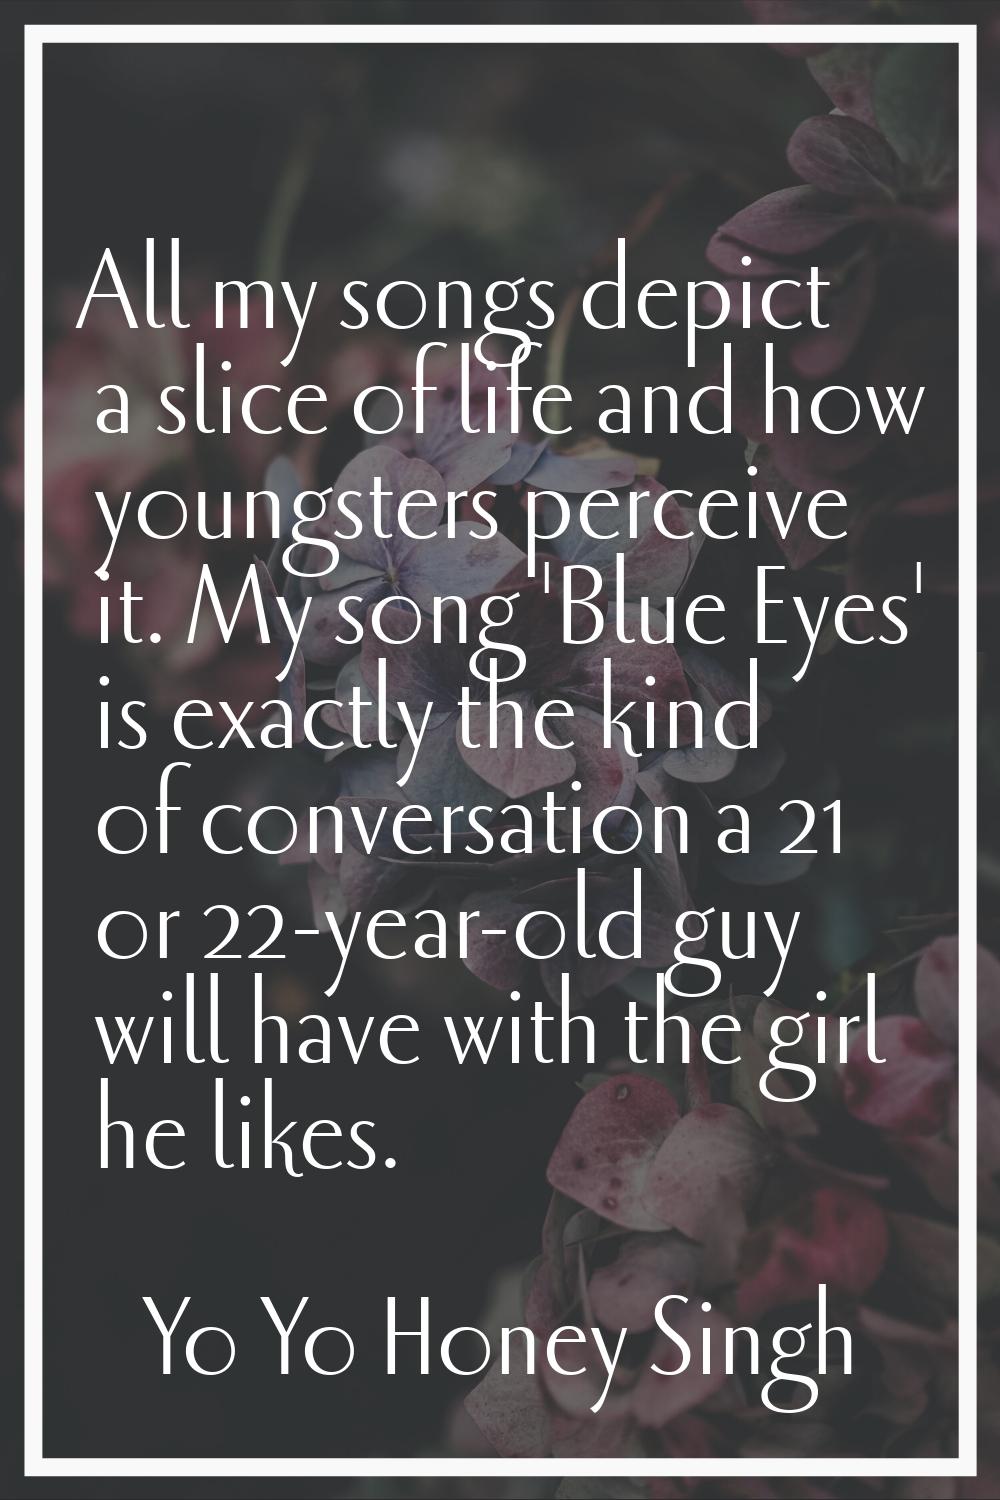 All my songs depict a slice of life and how youngsters perceive it. My song 'Blue Eyes' is exactly 